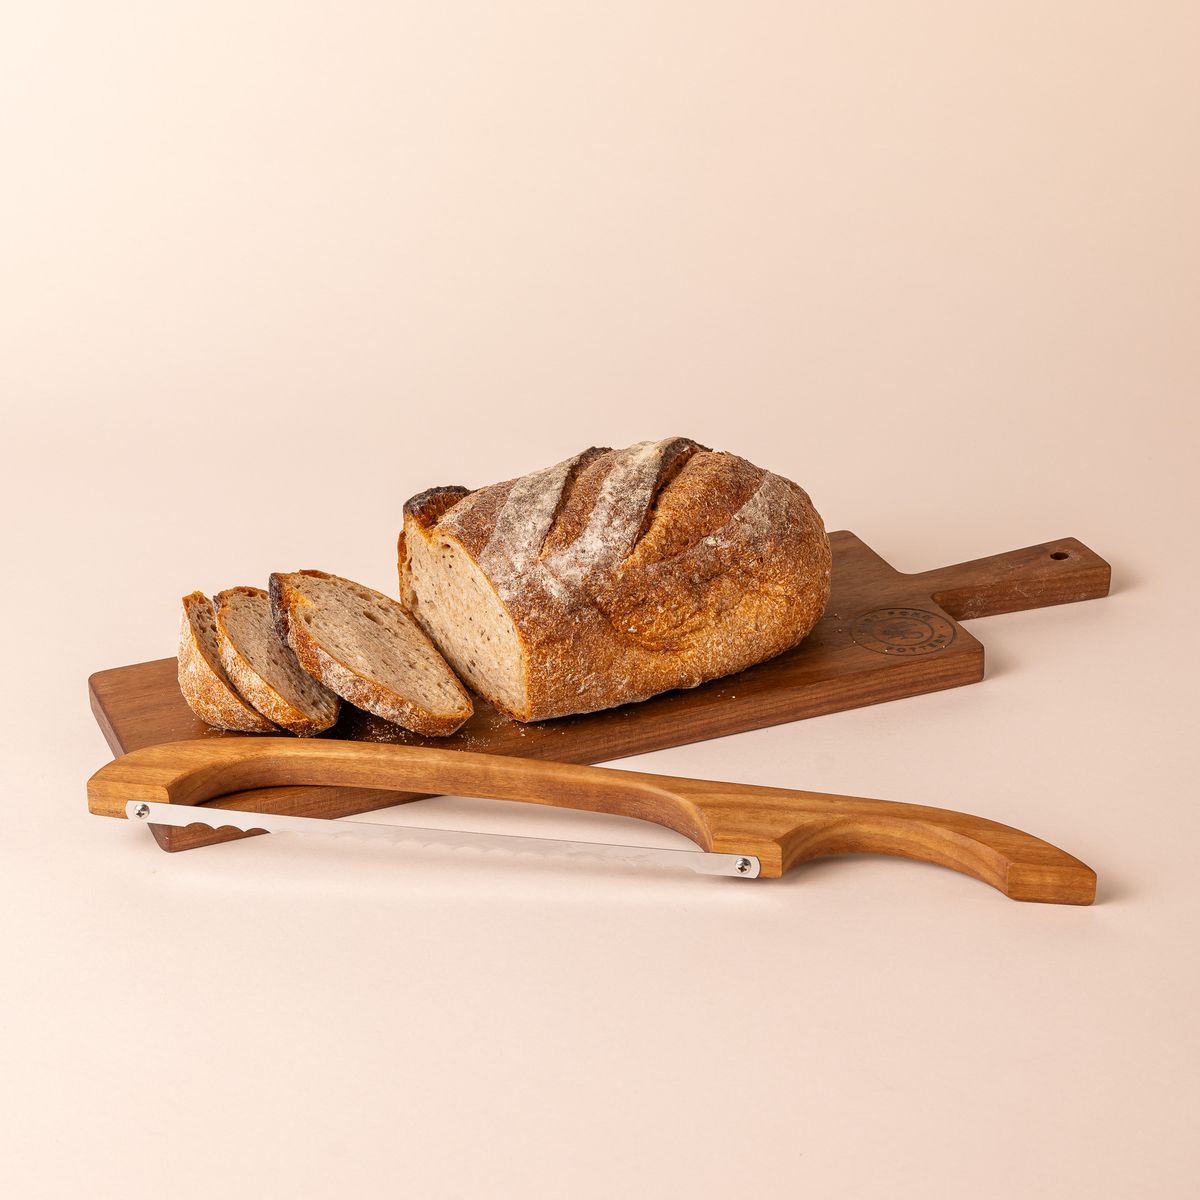 A loaf of bread with a few cut slices sits on a wood rectangle bread board with a handle. A matching wood bread bow sits on the side.